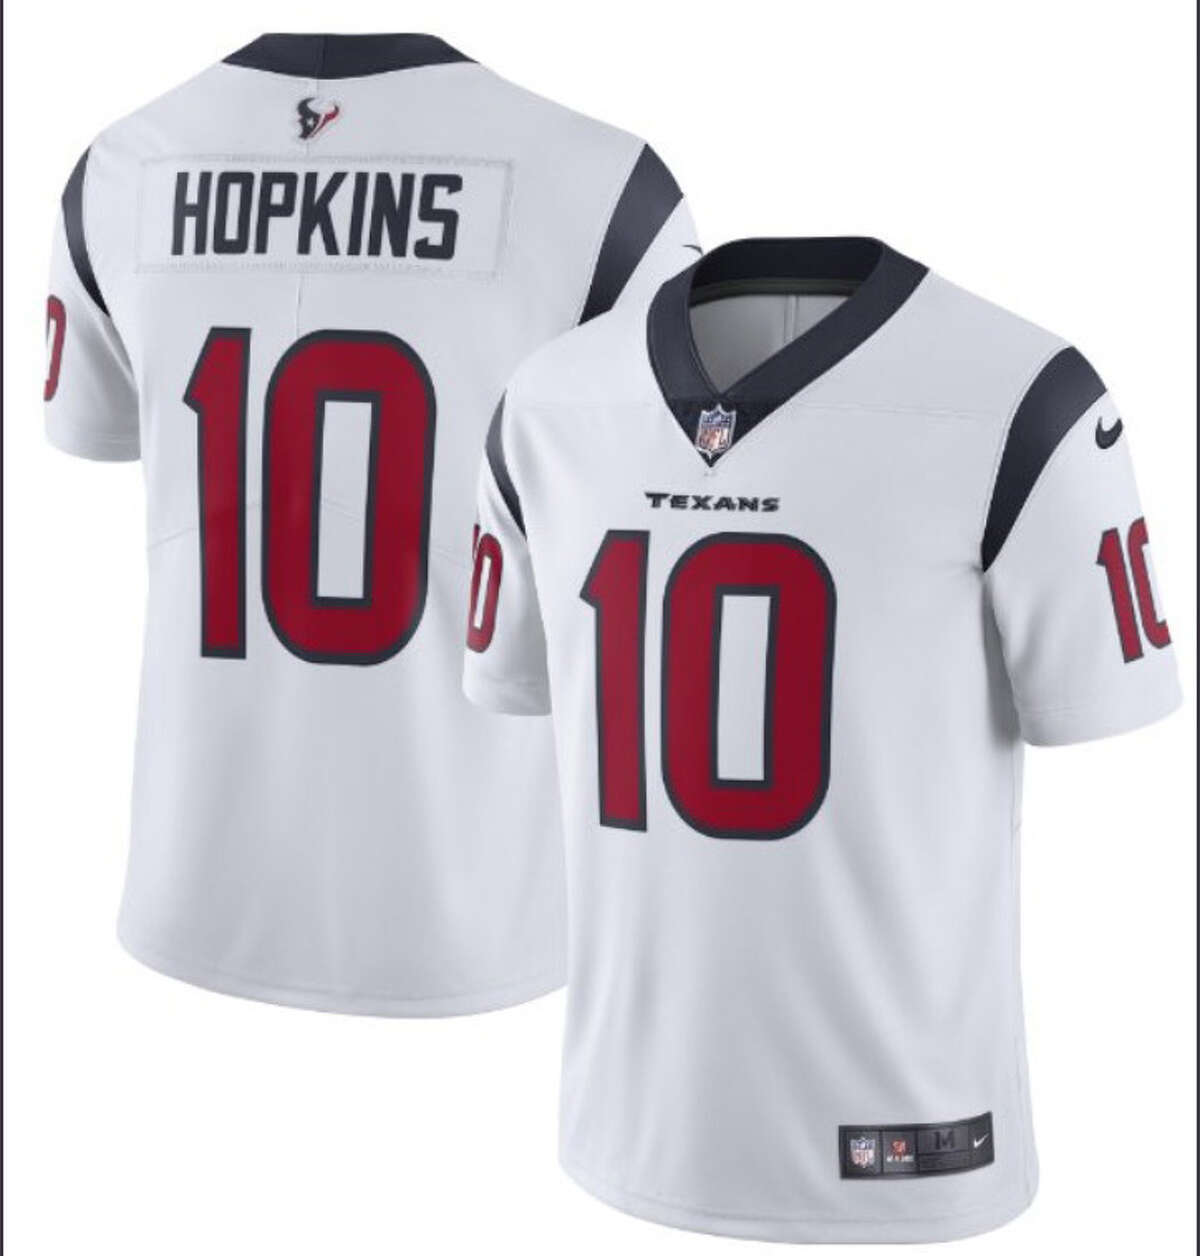 PHOTOS: A look at the Houston Texans' 2019 schedule A look at the Houston Texans jerseys for the 2019 season with the logo added on the back of each jersey.